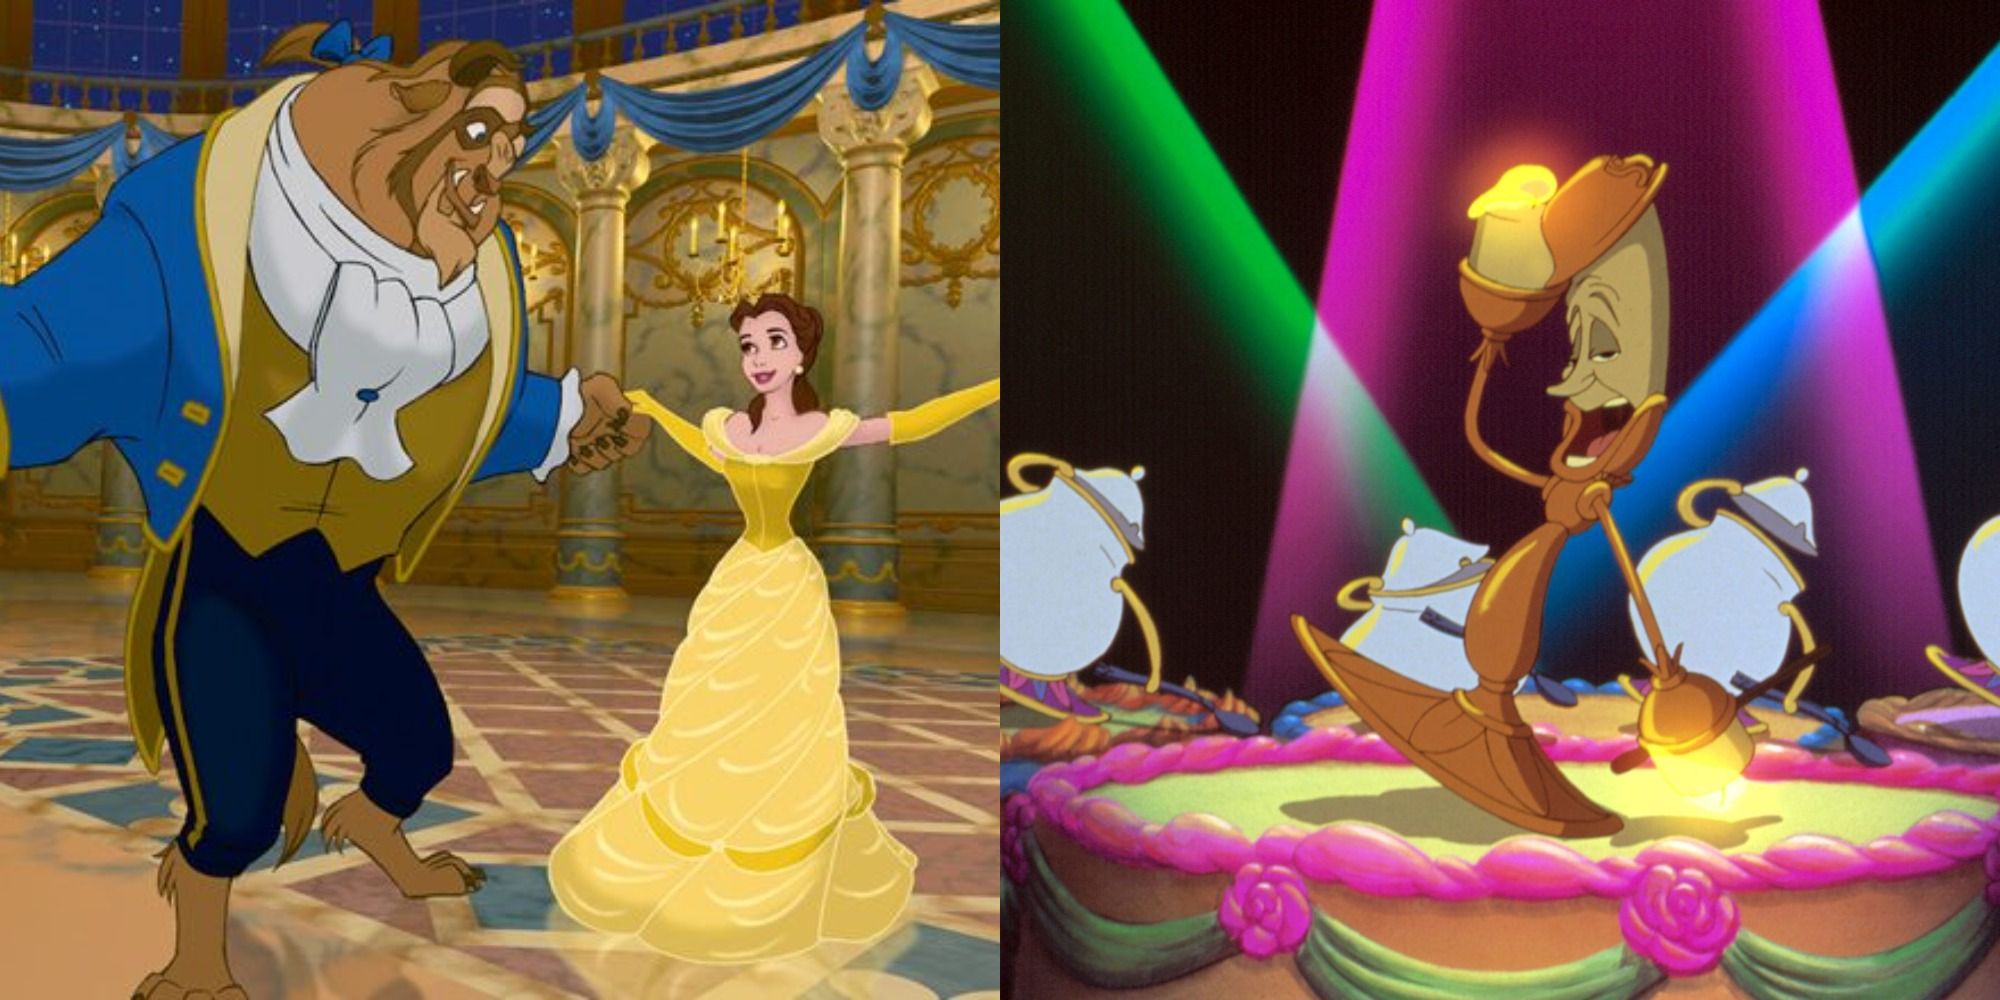 Top 10 Reasons Why Beauty And The Beast Is The Best Disney Princess Movie